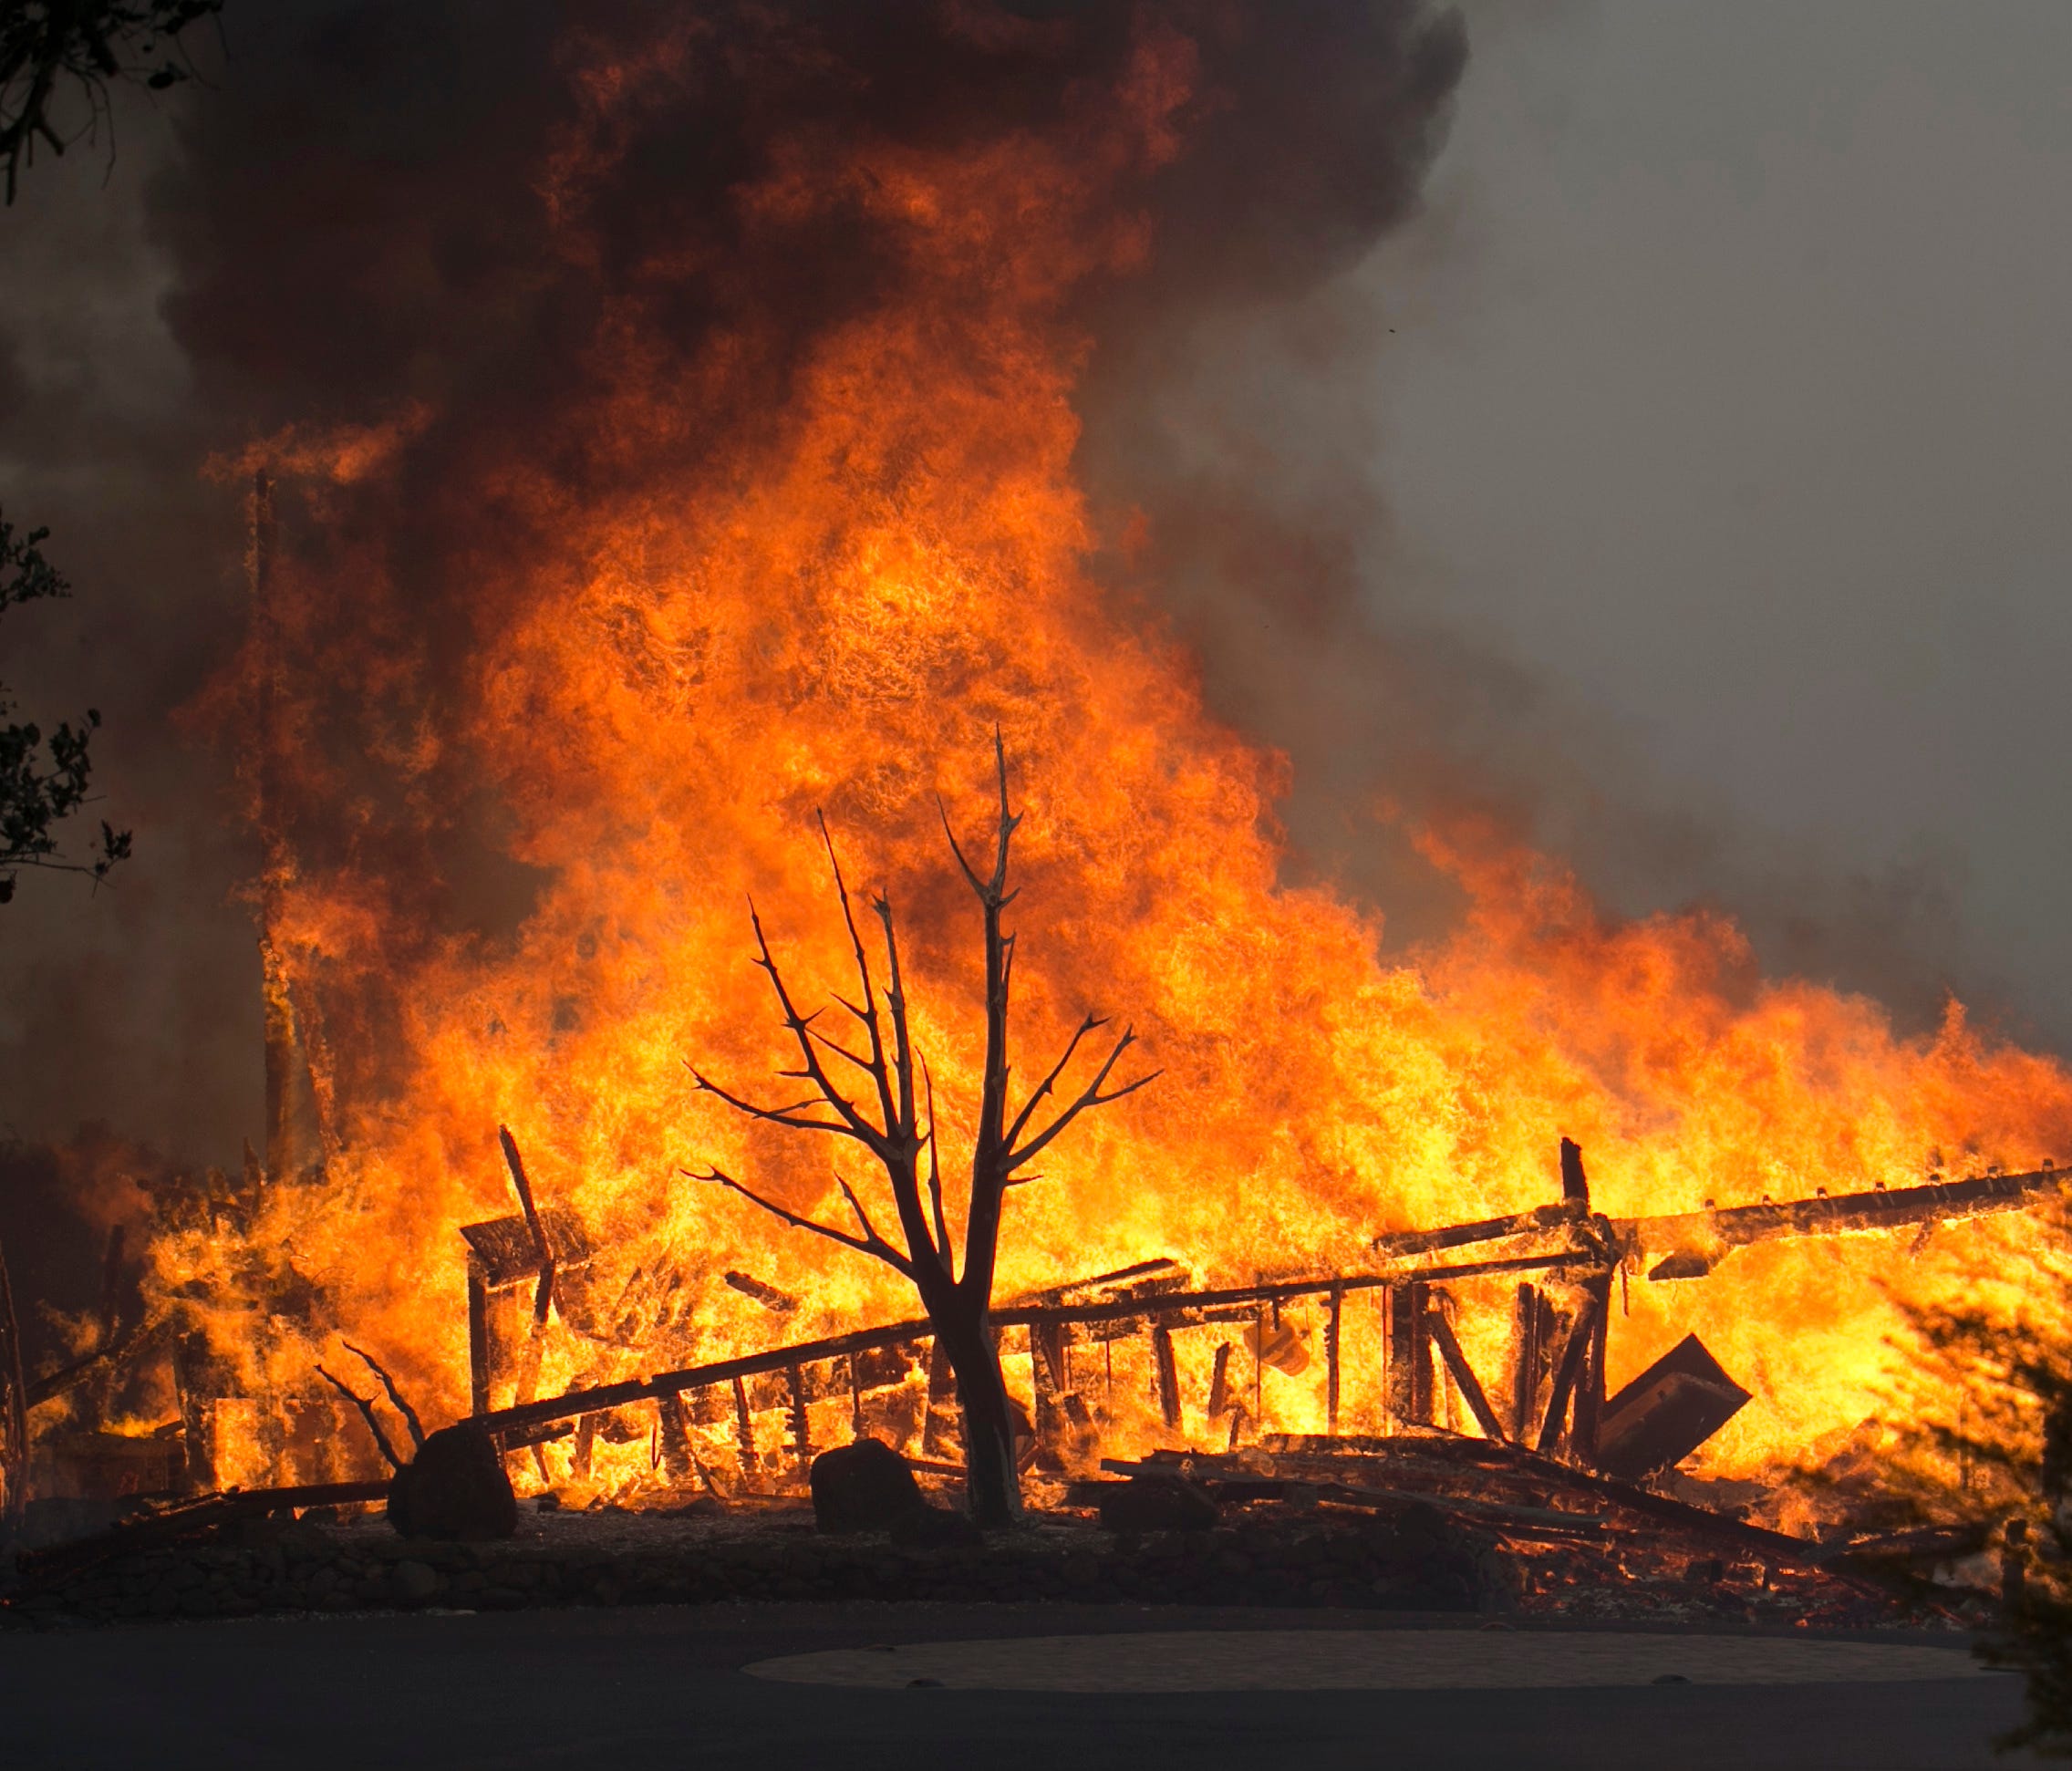 Flames from a wildfire consume a home  east of Napa, Calif. Oct. 9, 2017.